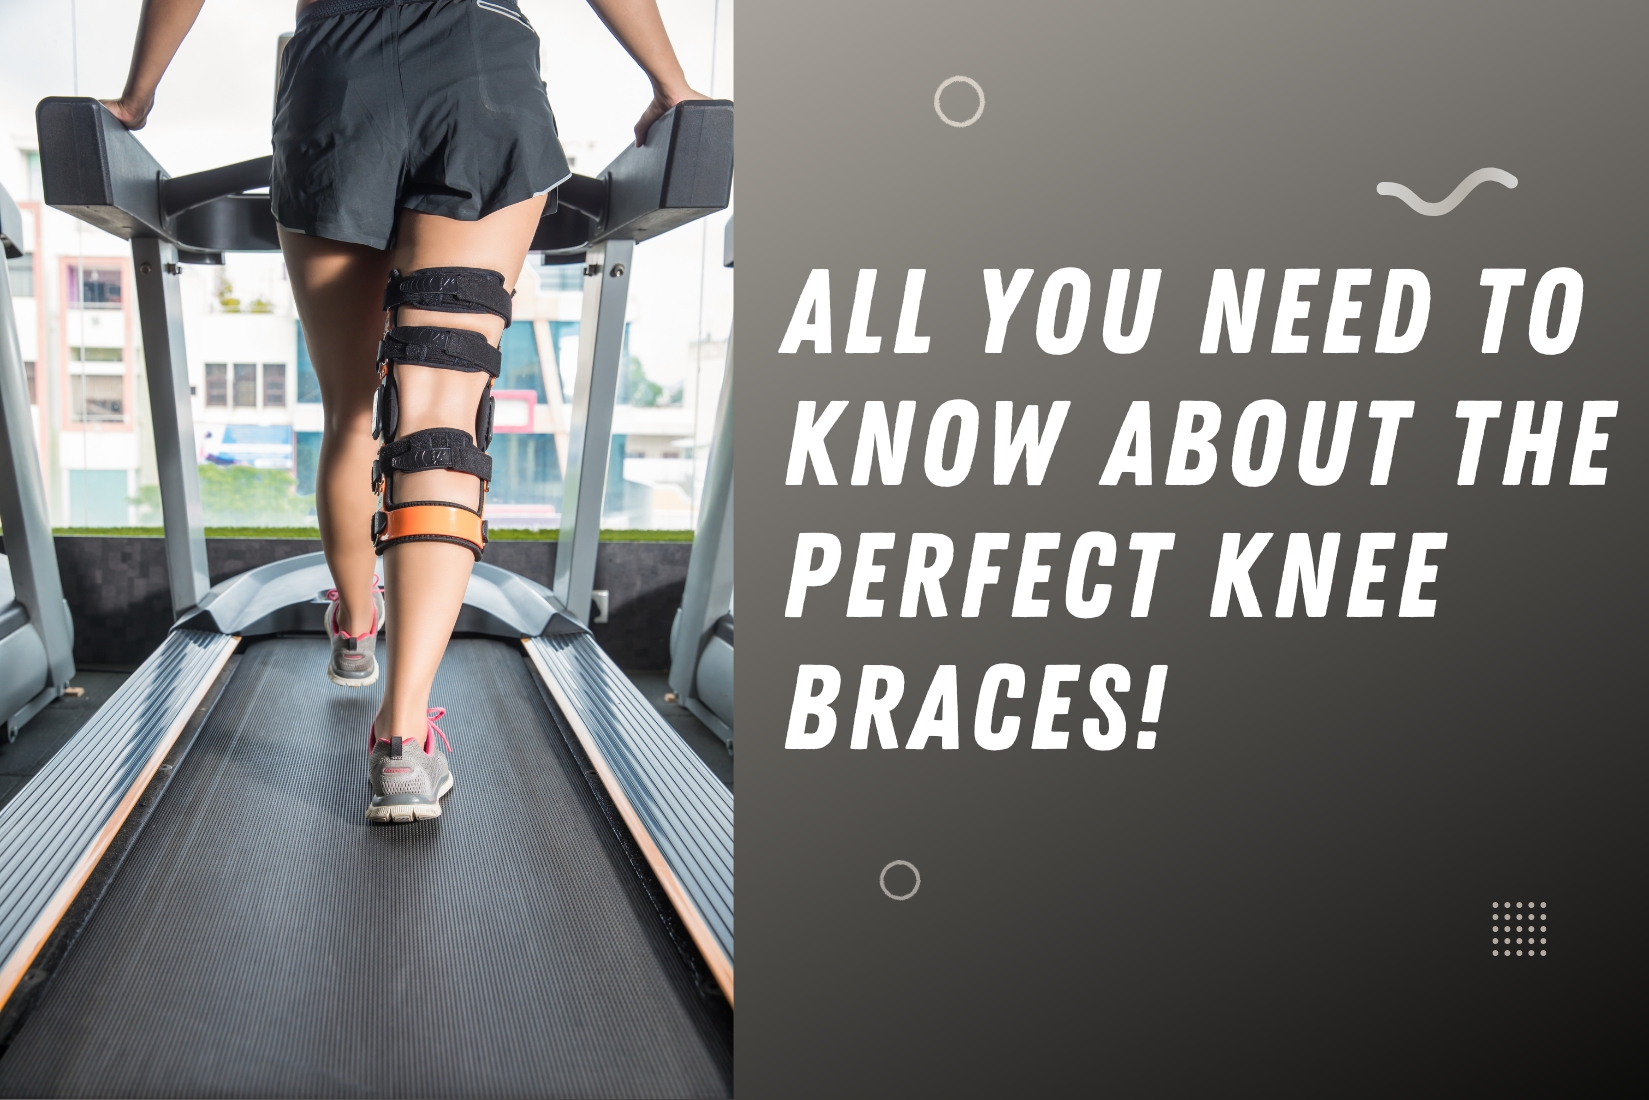 All you need to know about the perfect knee braces!